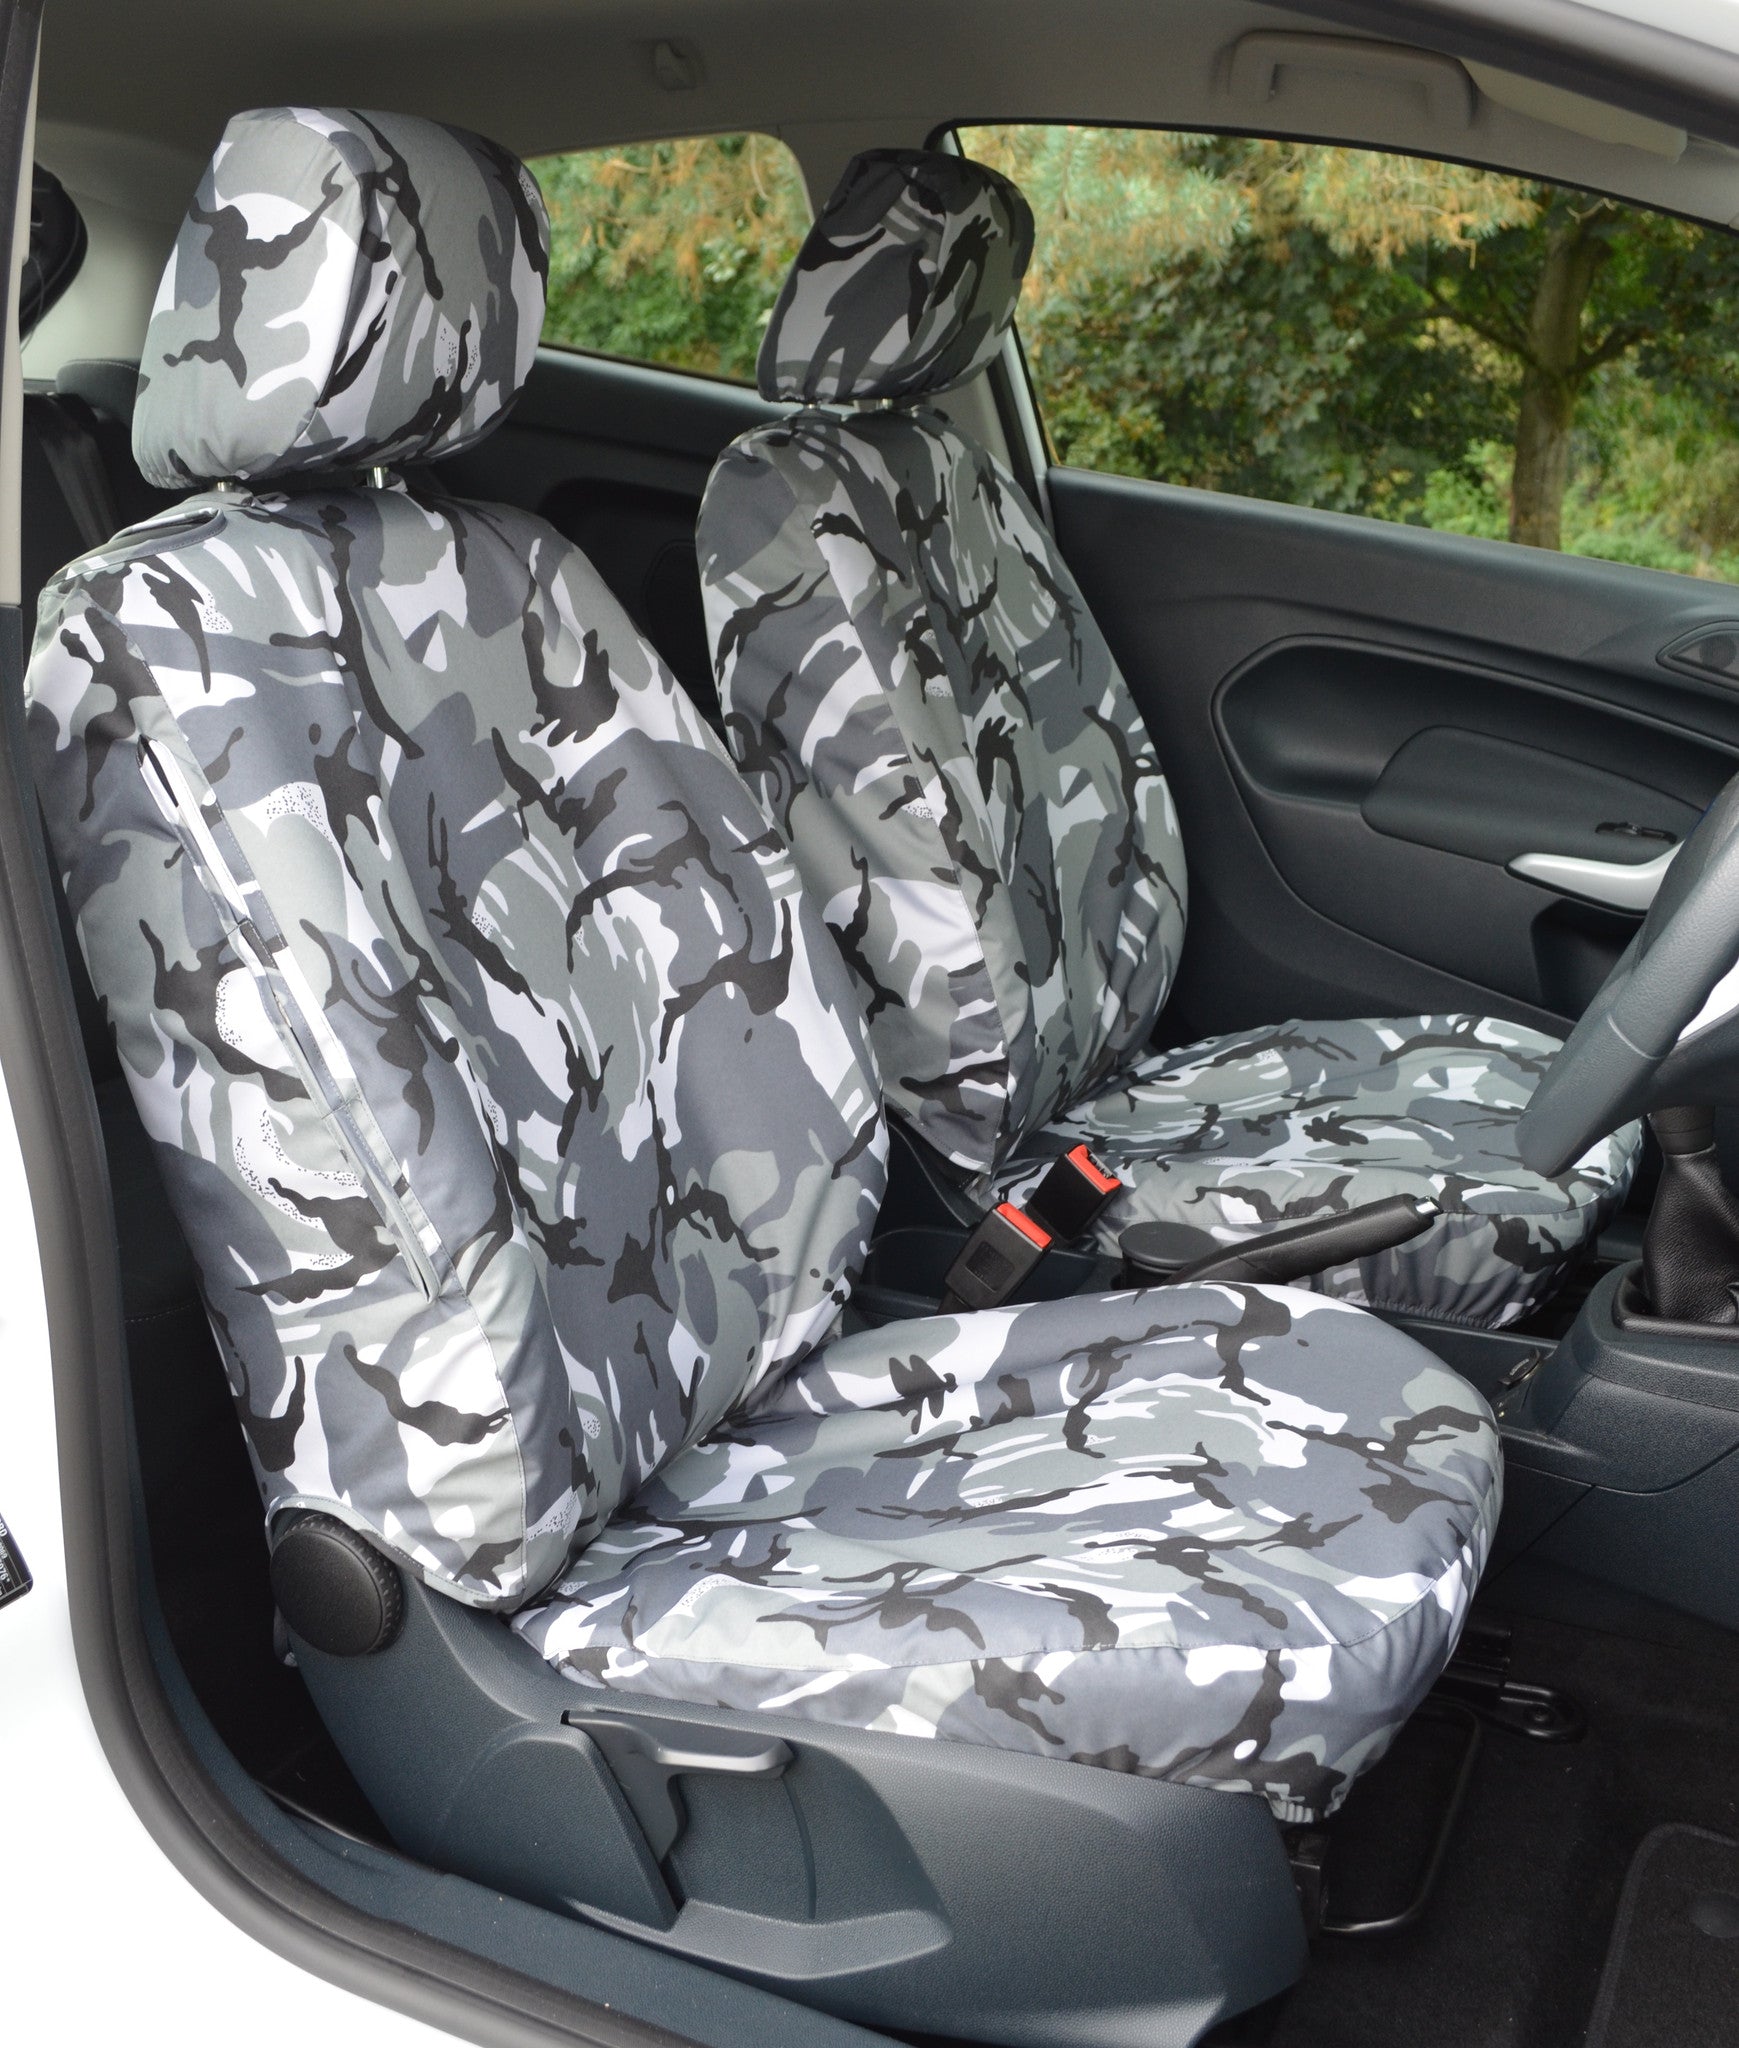 Ford Fiesta Van 2008 - 2018 Tailored Seat Covers Urban Camouflage Turtle Covers Ltd